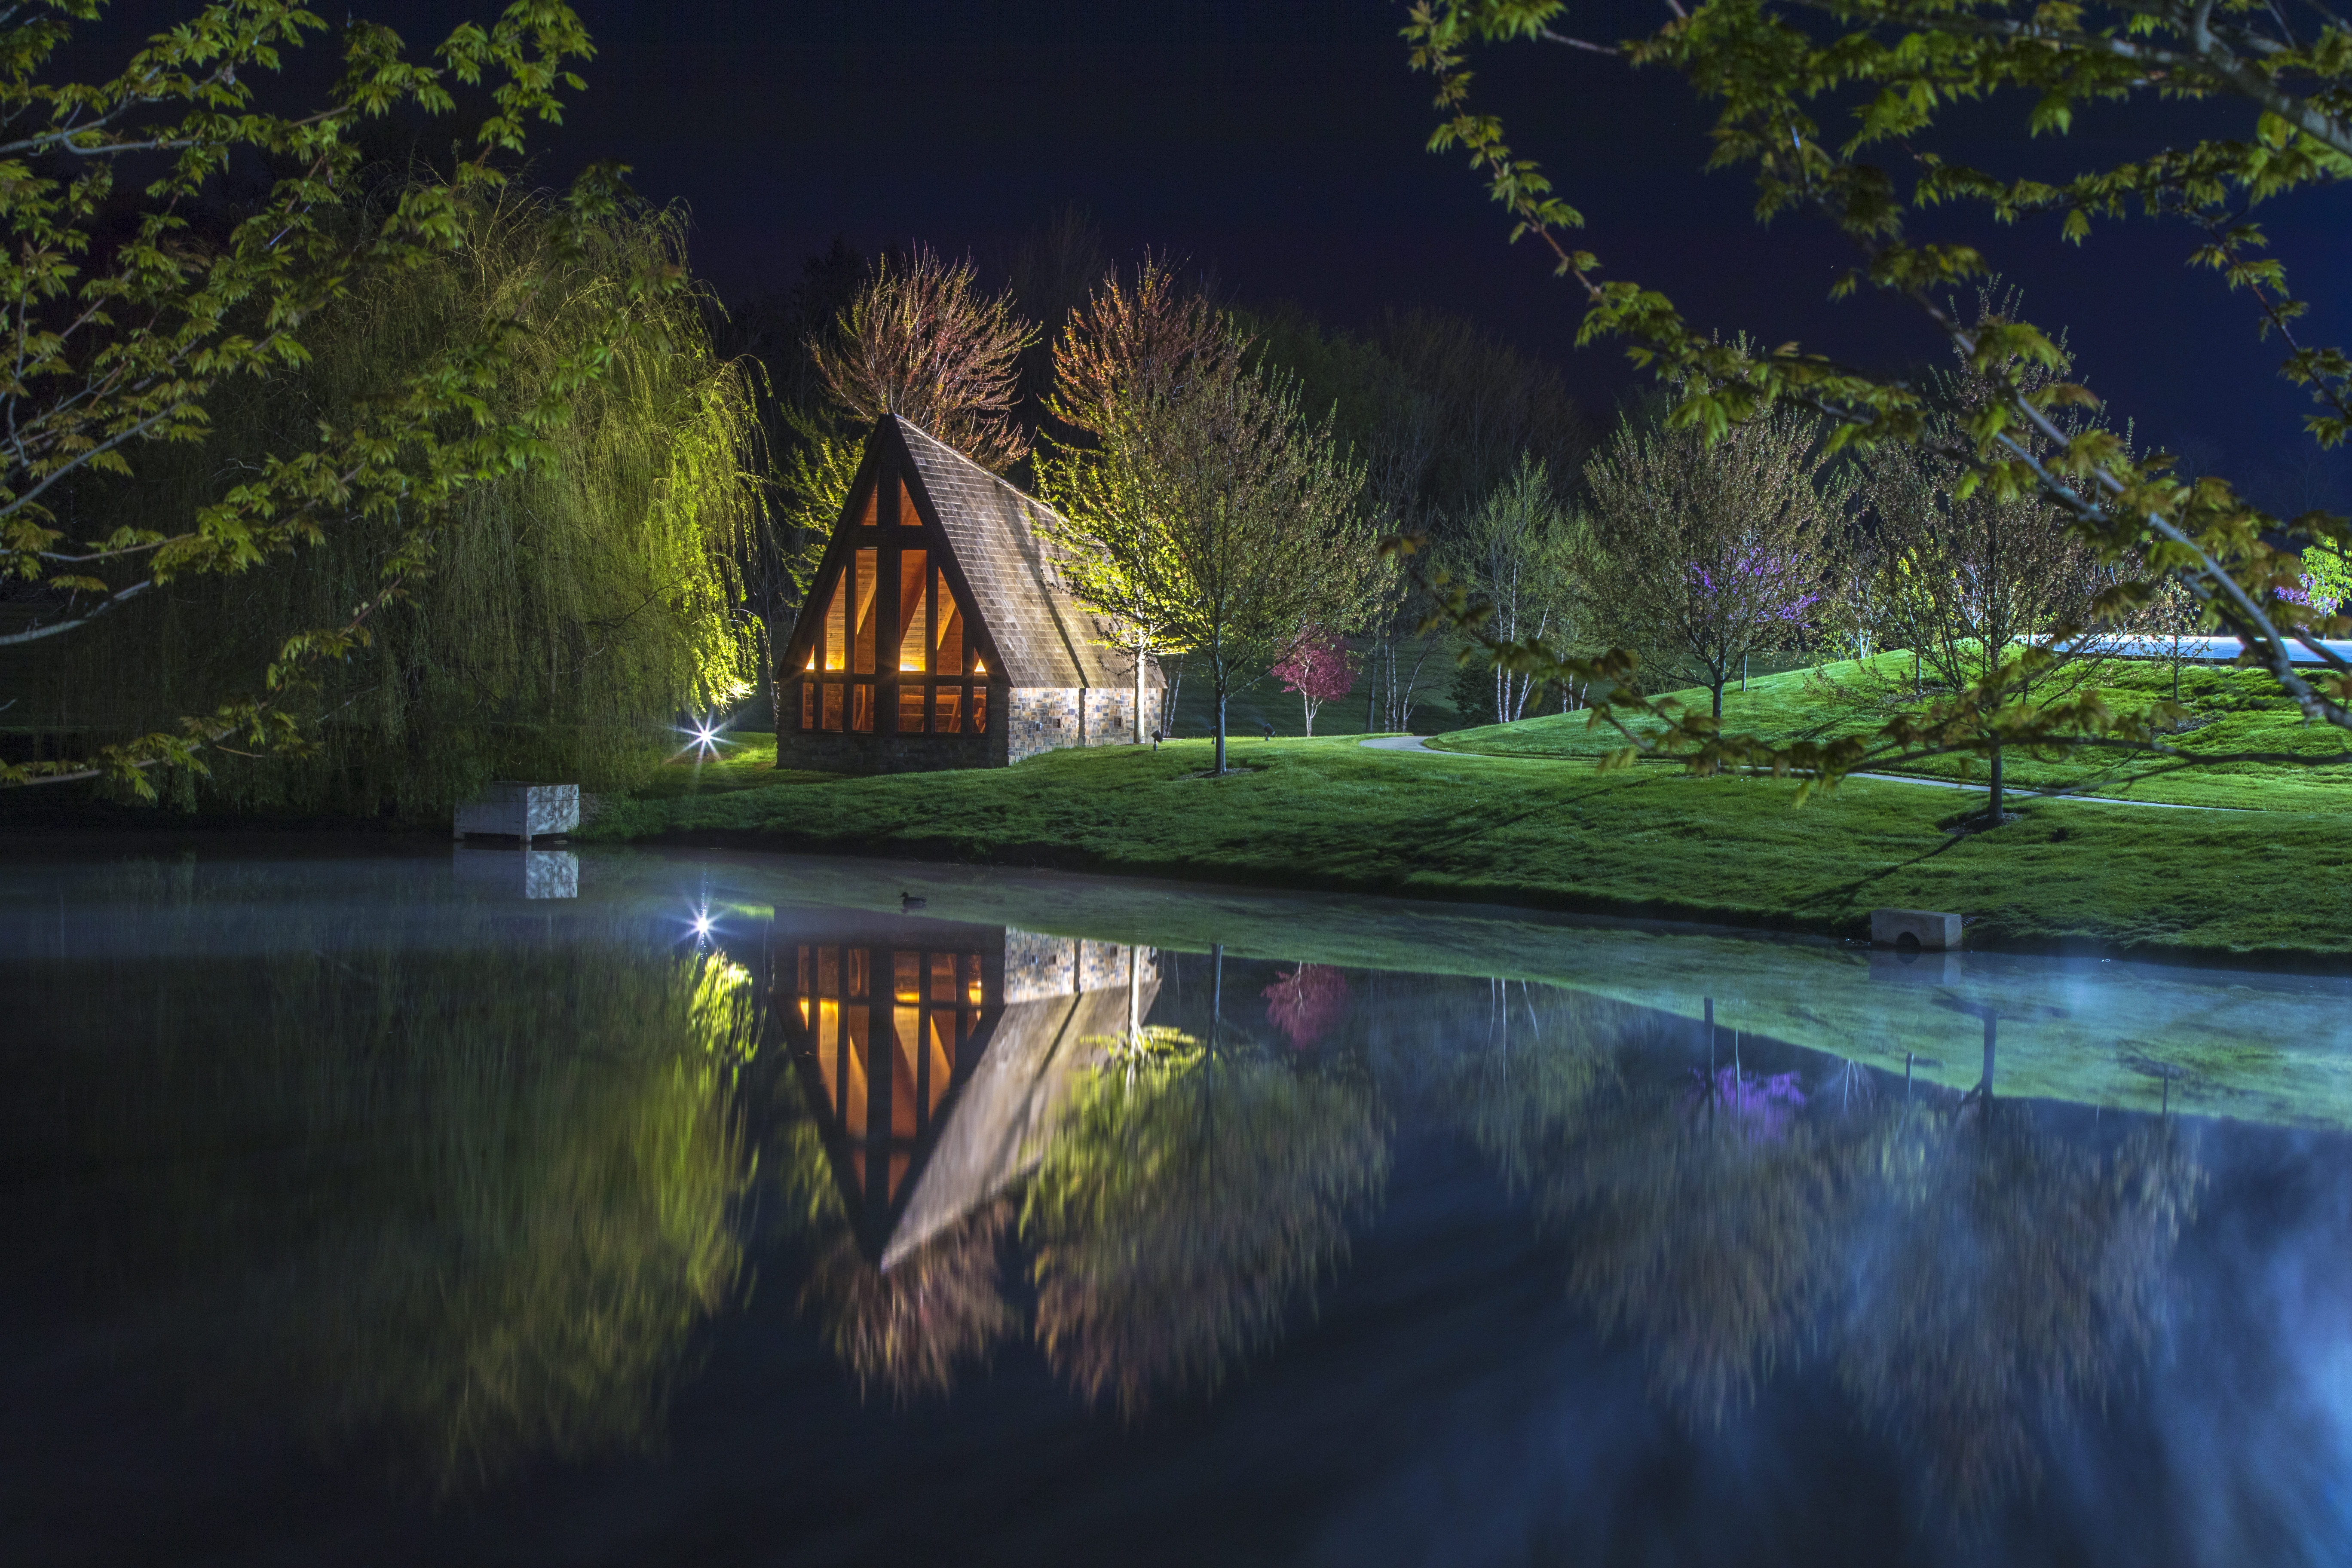 Landscape Nature Water Lake Trees Grass Plantes Night House Reflection Sky Cabin 5472x3648